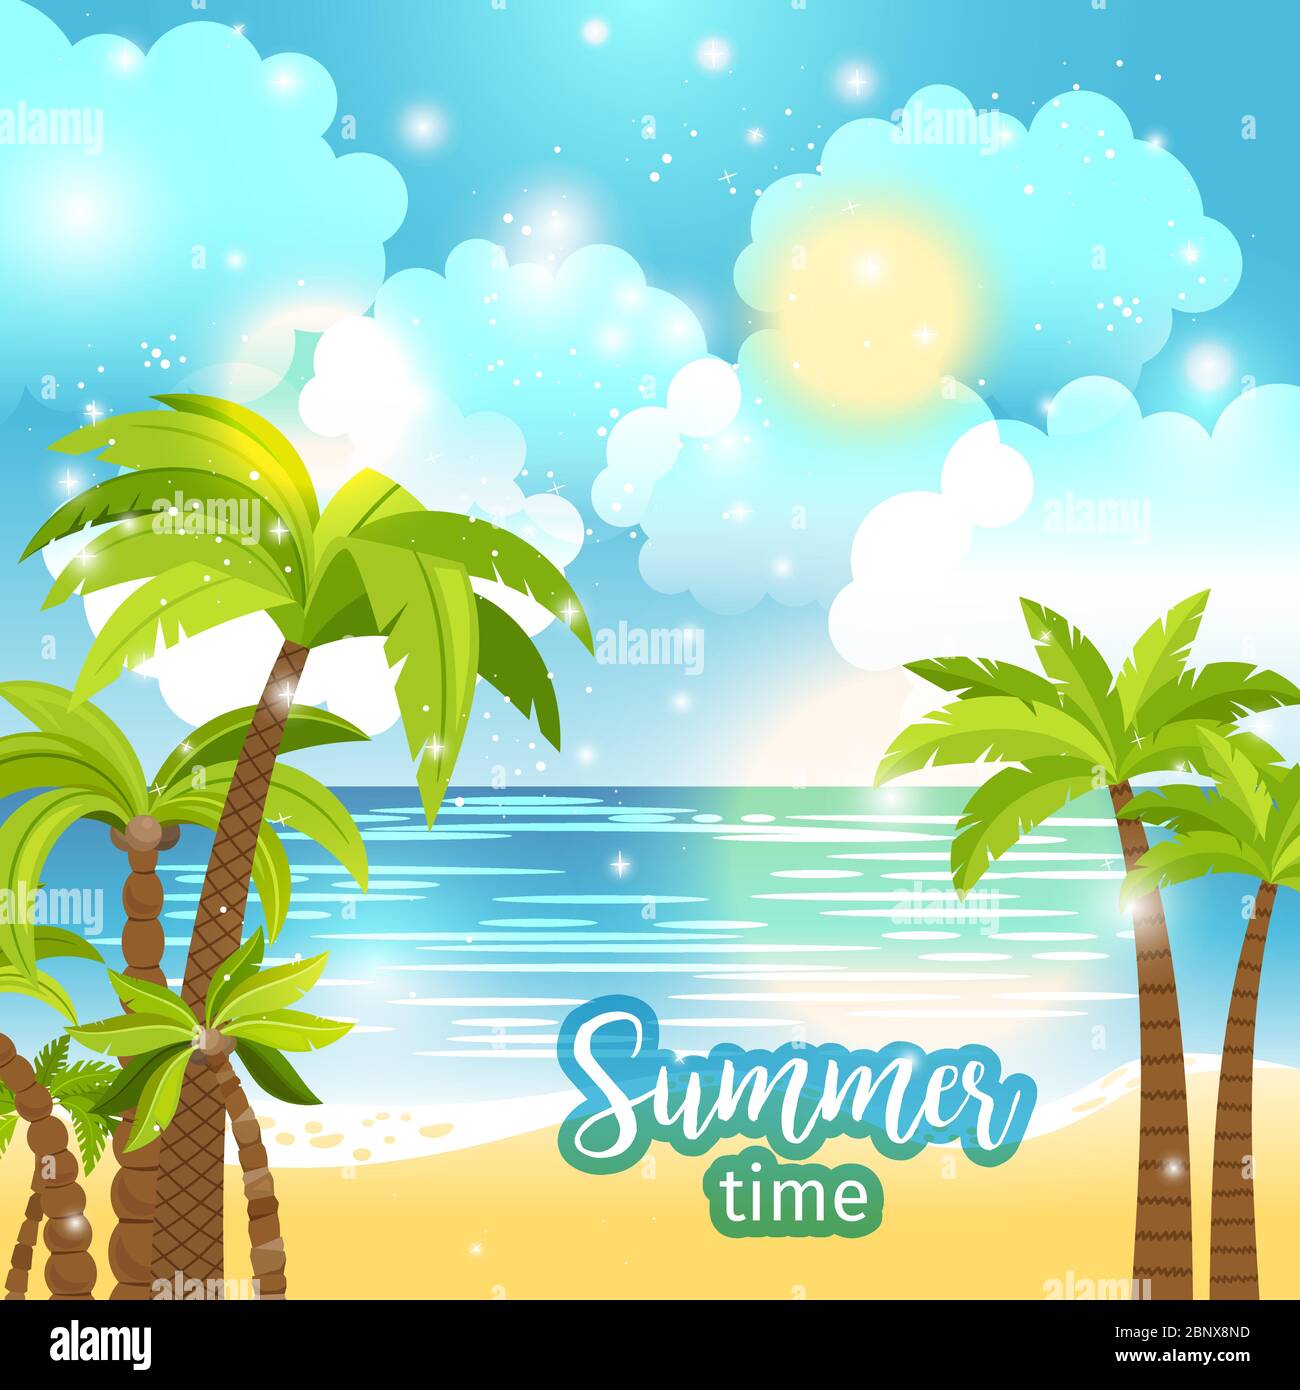 Summer time sea view vector background with palm trees Stock Vector